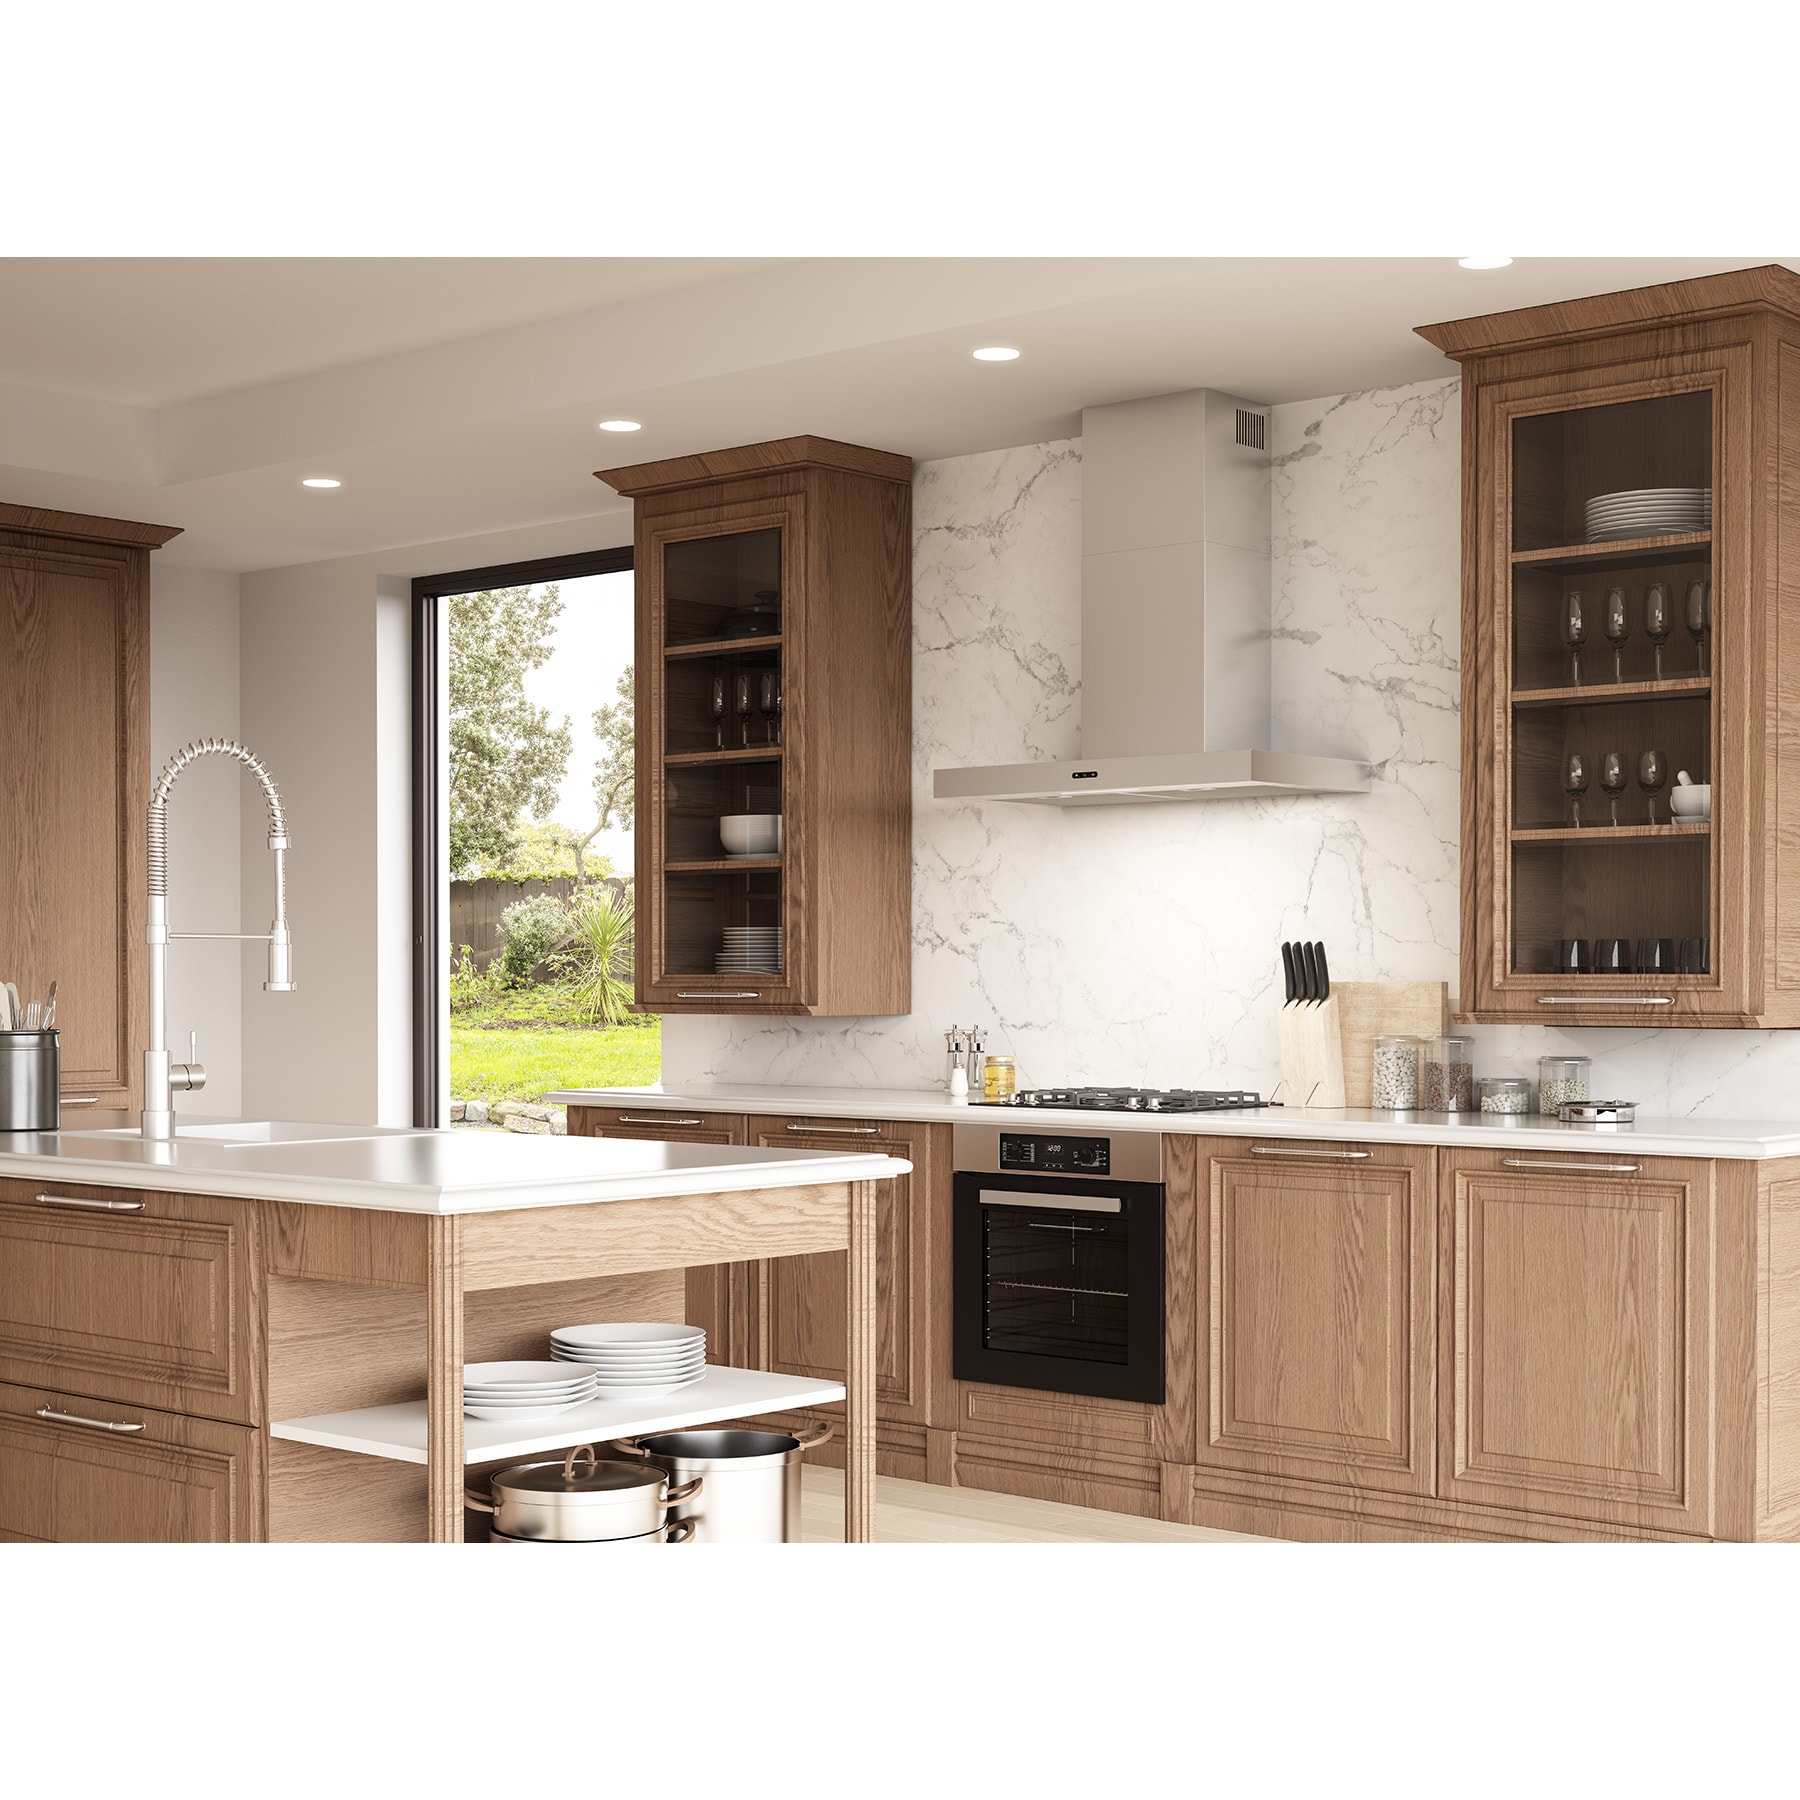 Broan(R) 36 Convertible Under-Cabinet Over The Range Hood